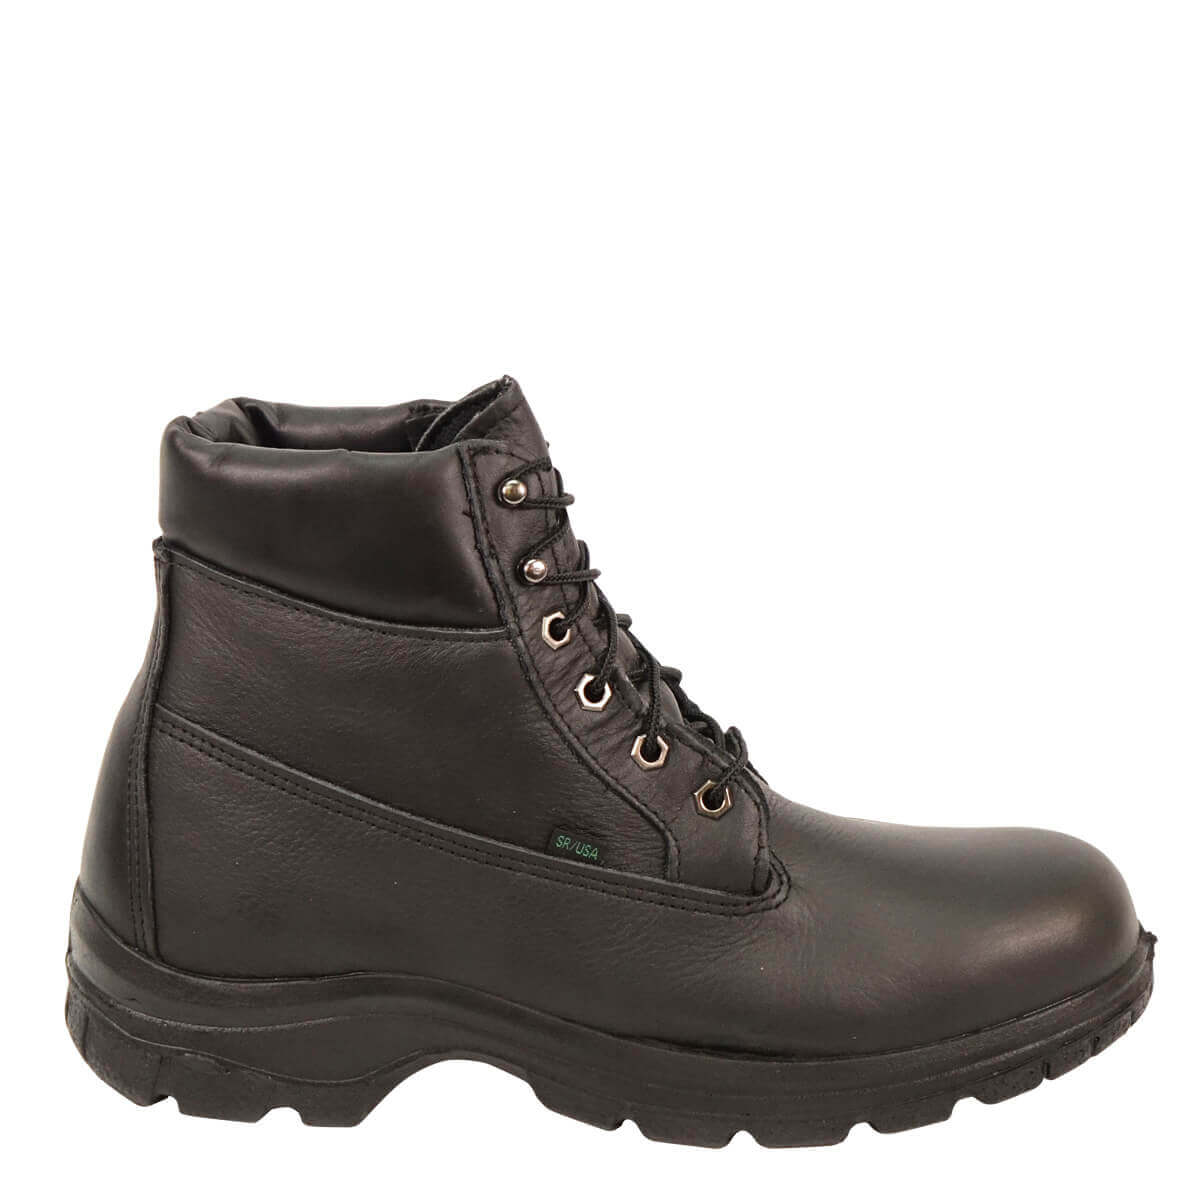 SOFT STREETS™ Series - Insulated - 6 Women's Sport Boot